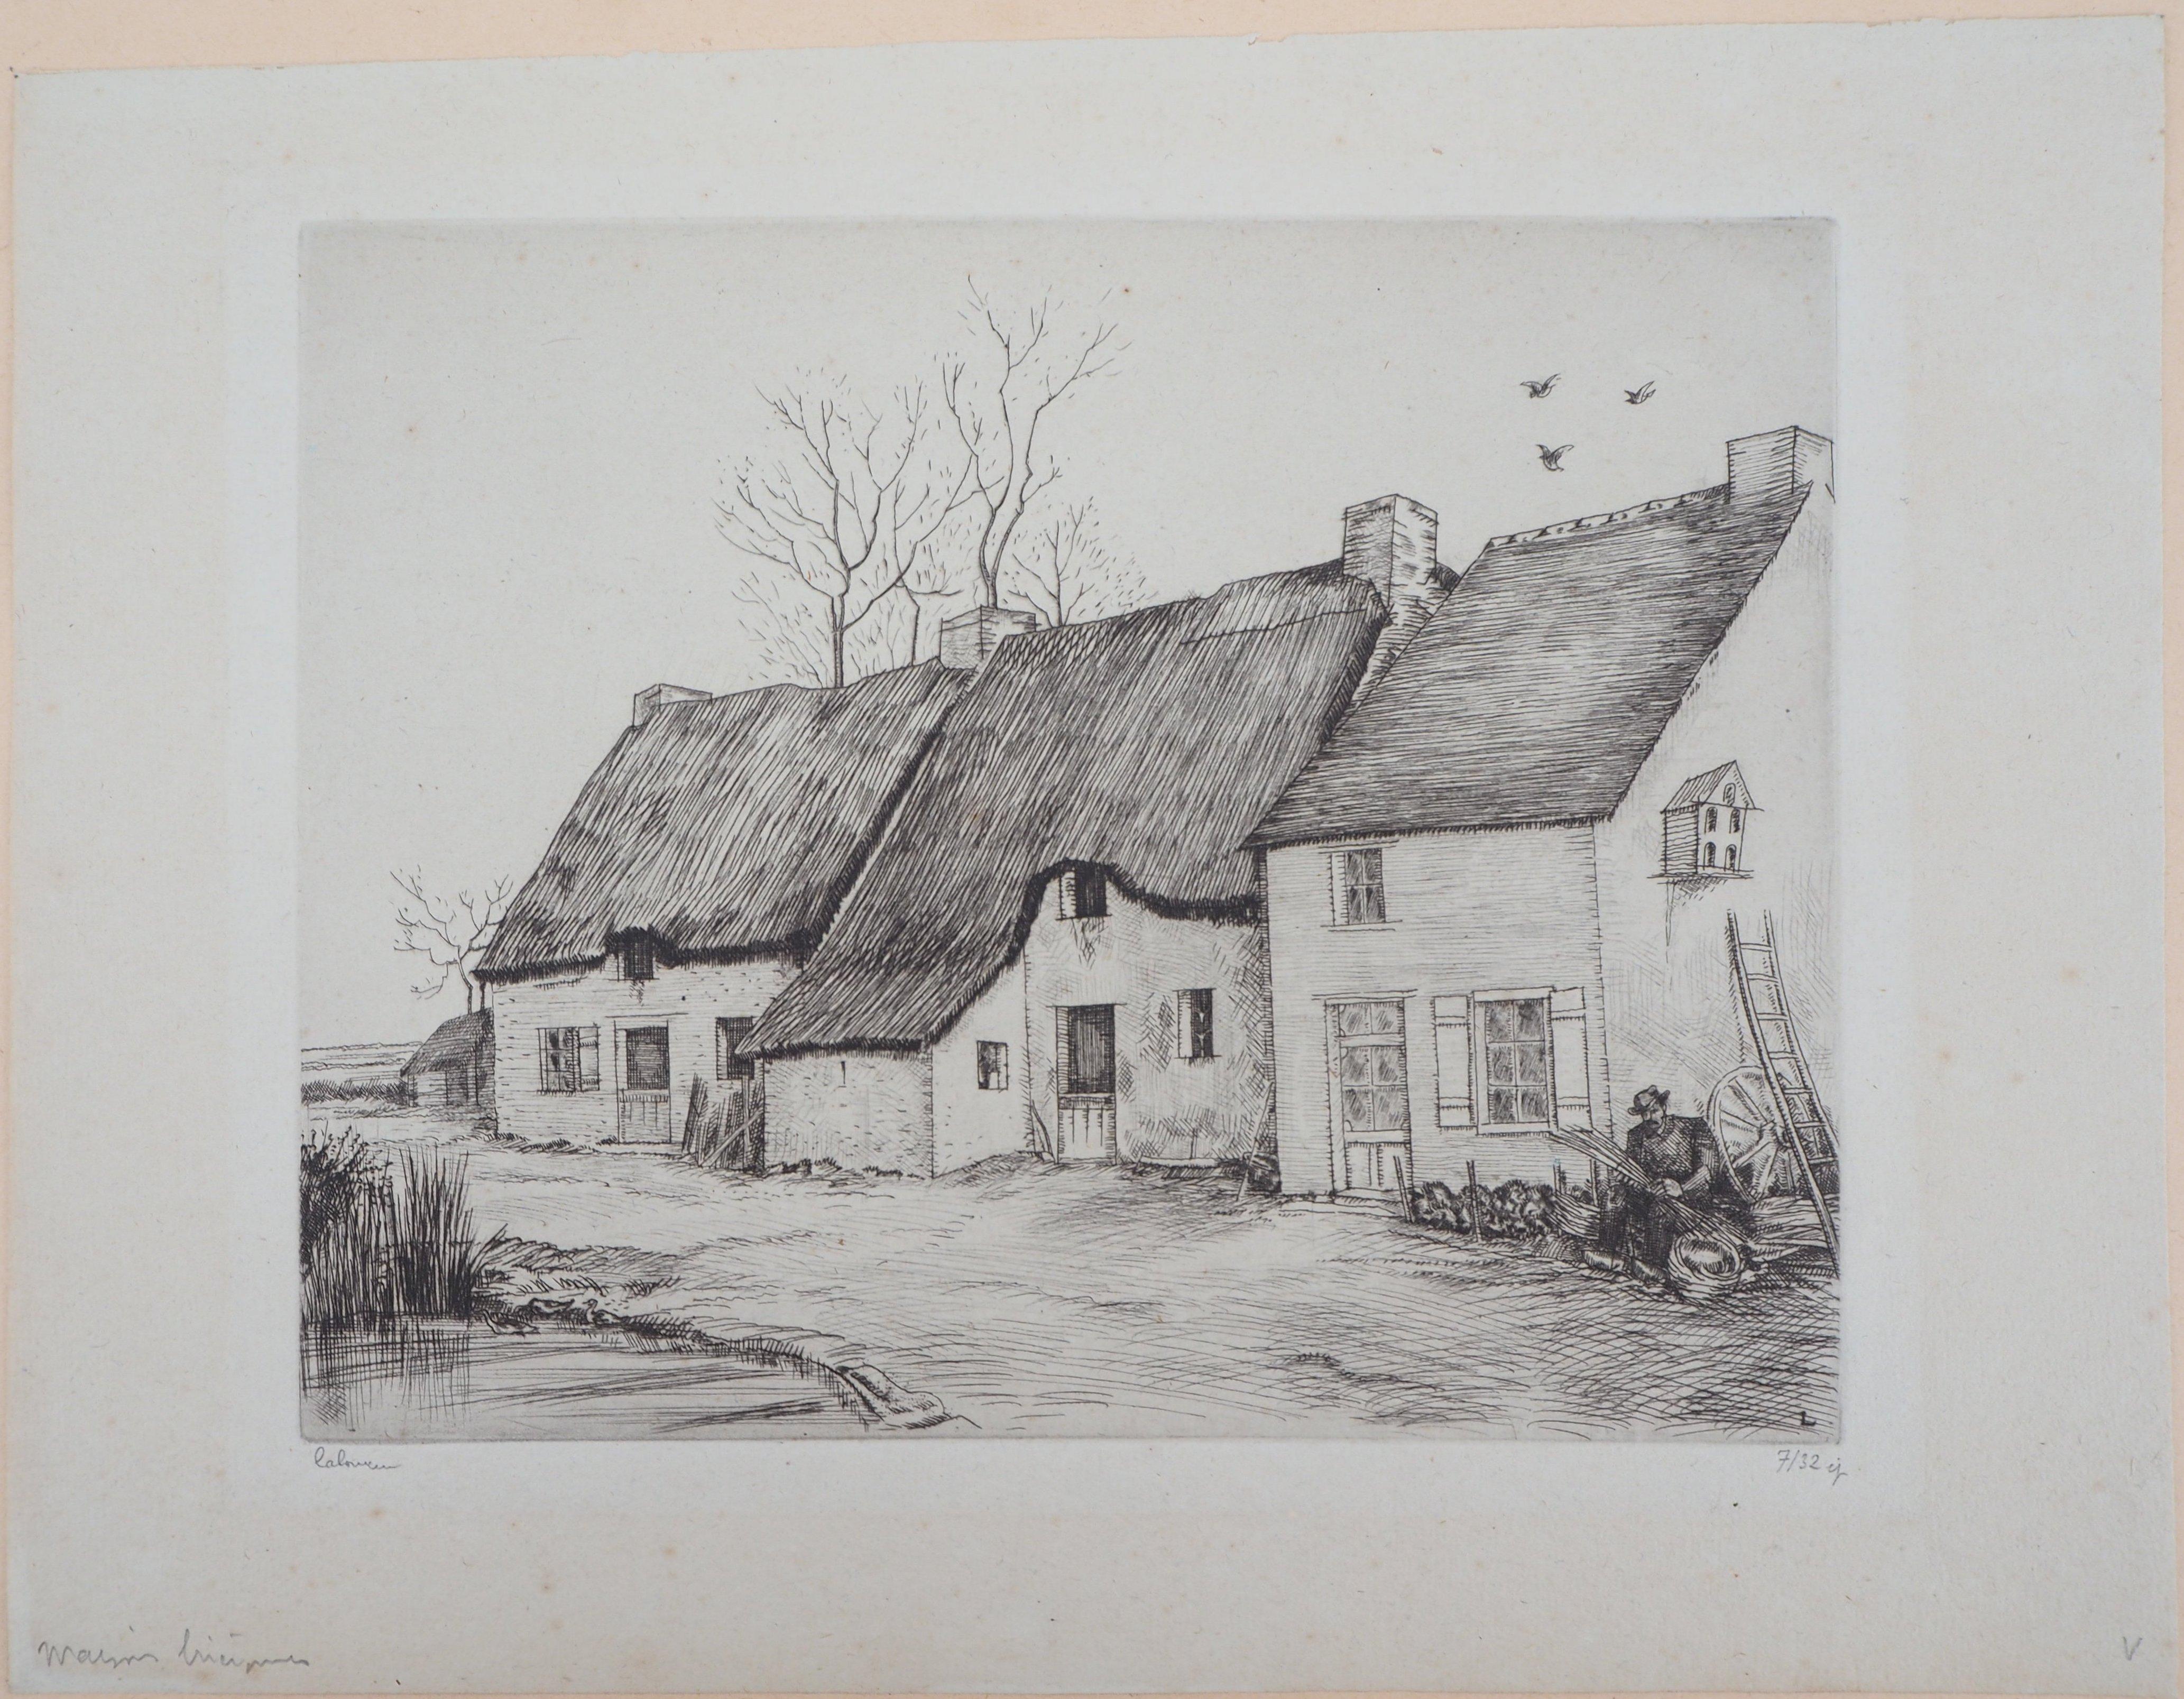 Houses in Brittany - Original Etching, Handsigned - Modern Print by Jean-Emile Laboureur